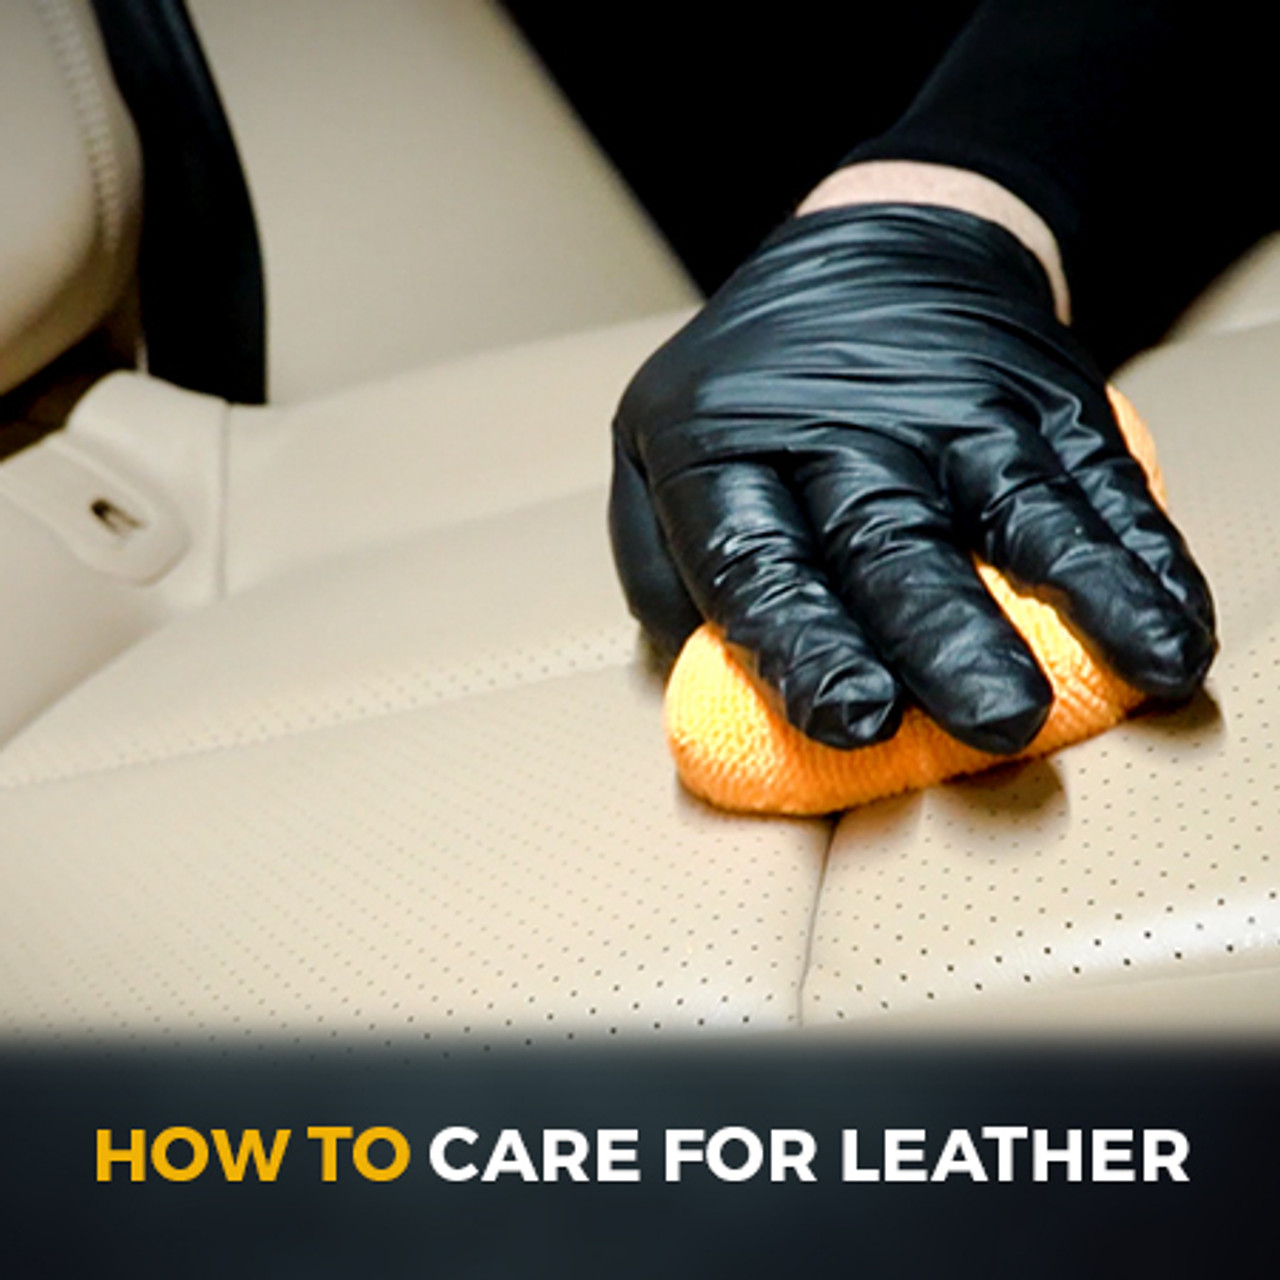 How to Care for Leather